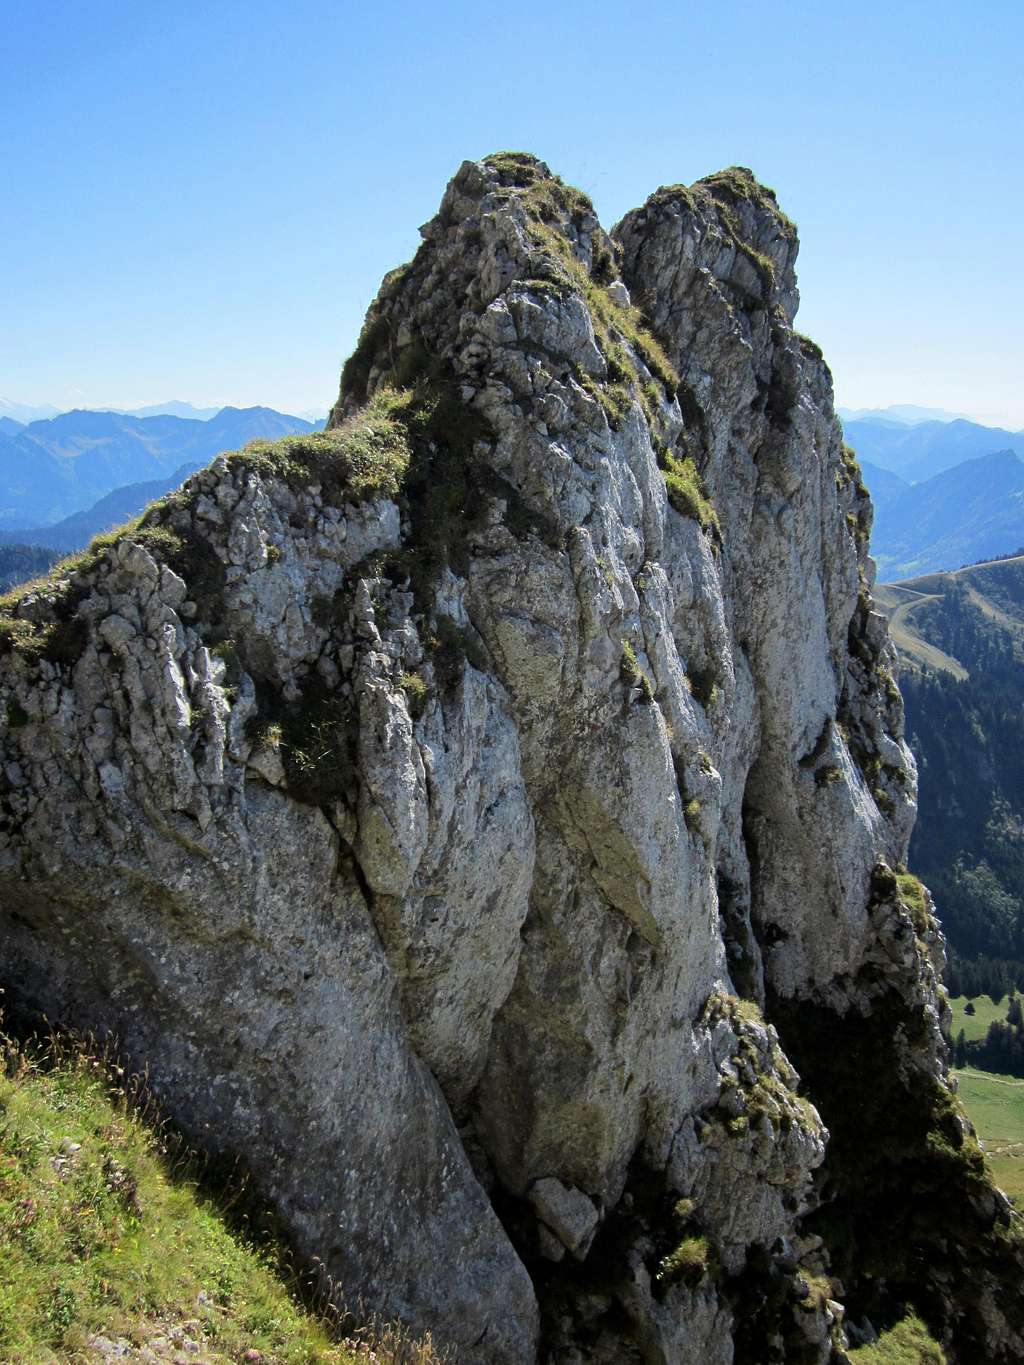 One of the many rock outcrops on Dent d'Oche